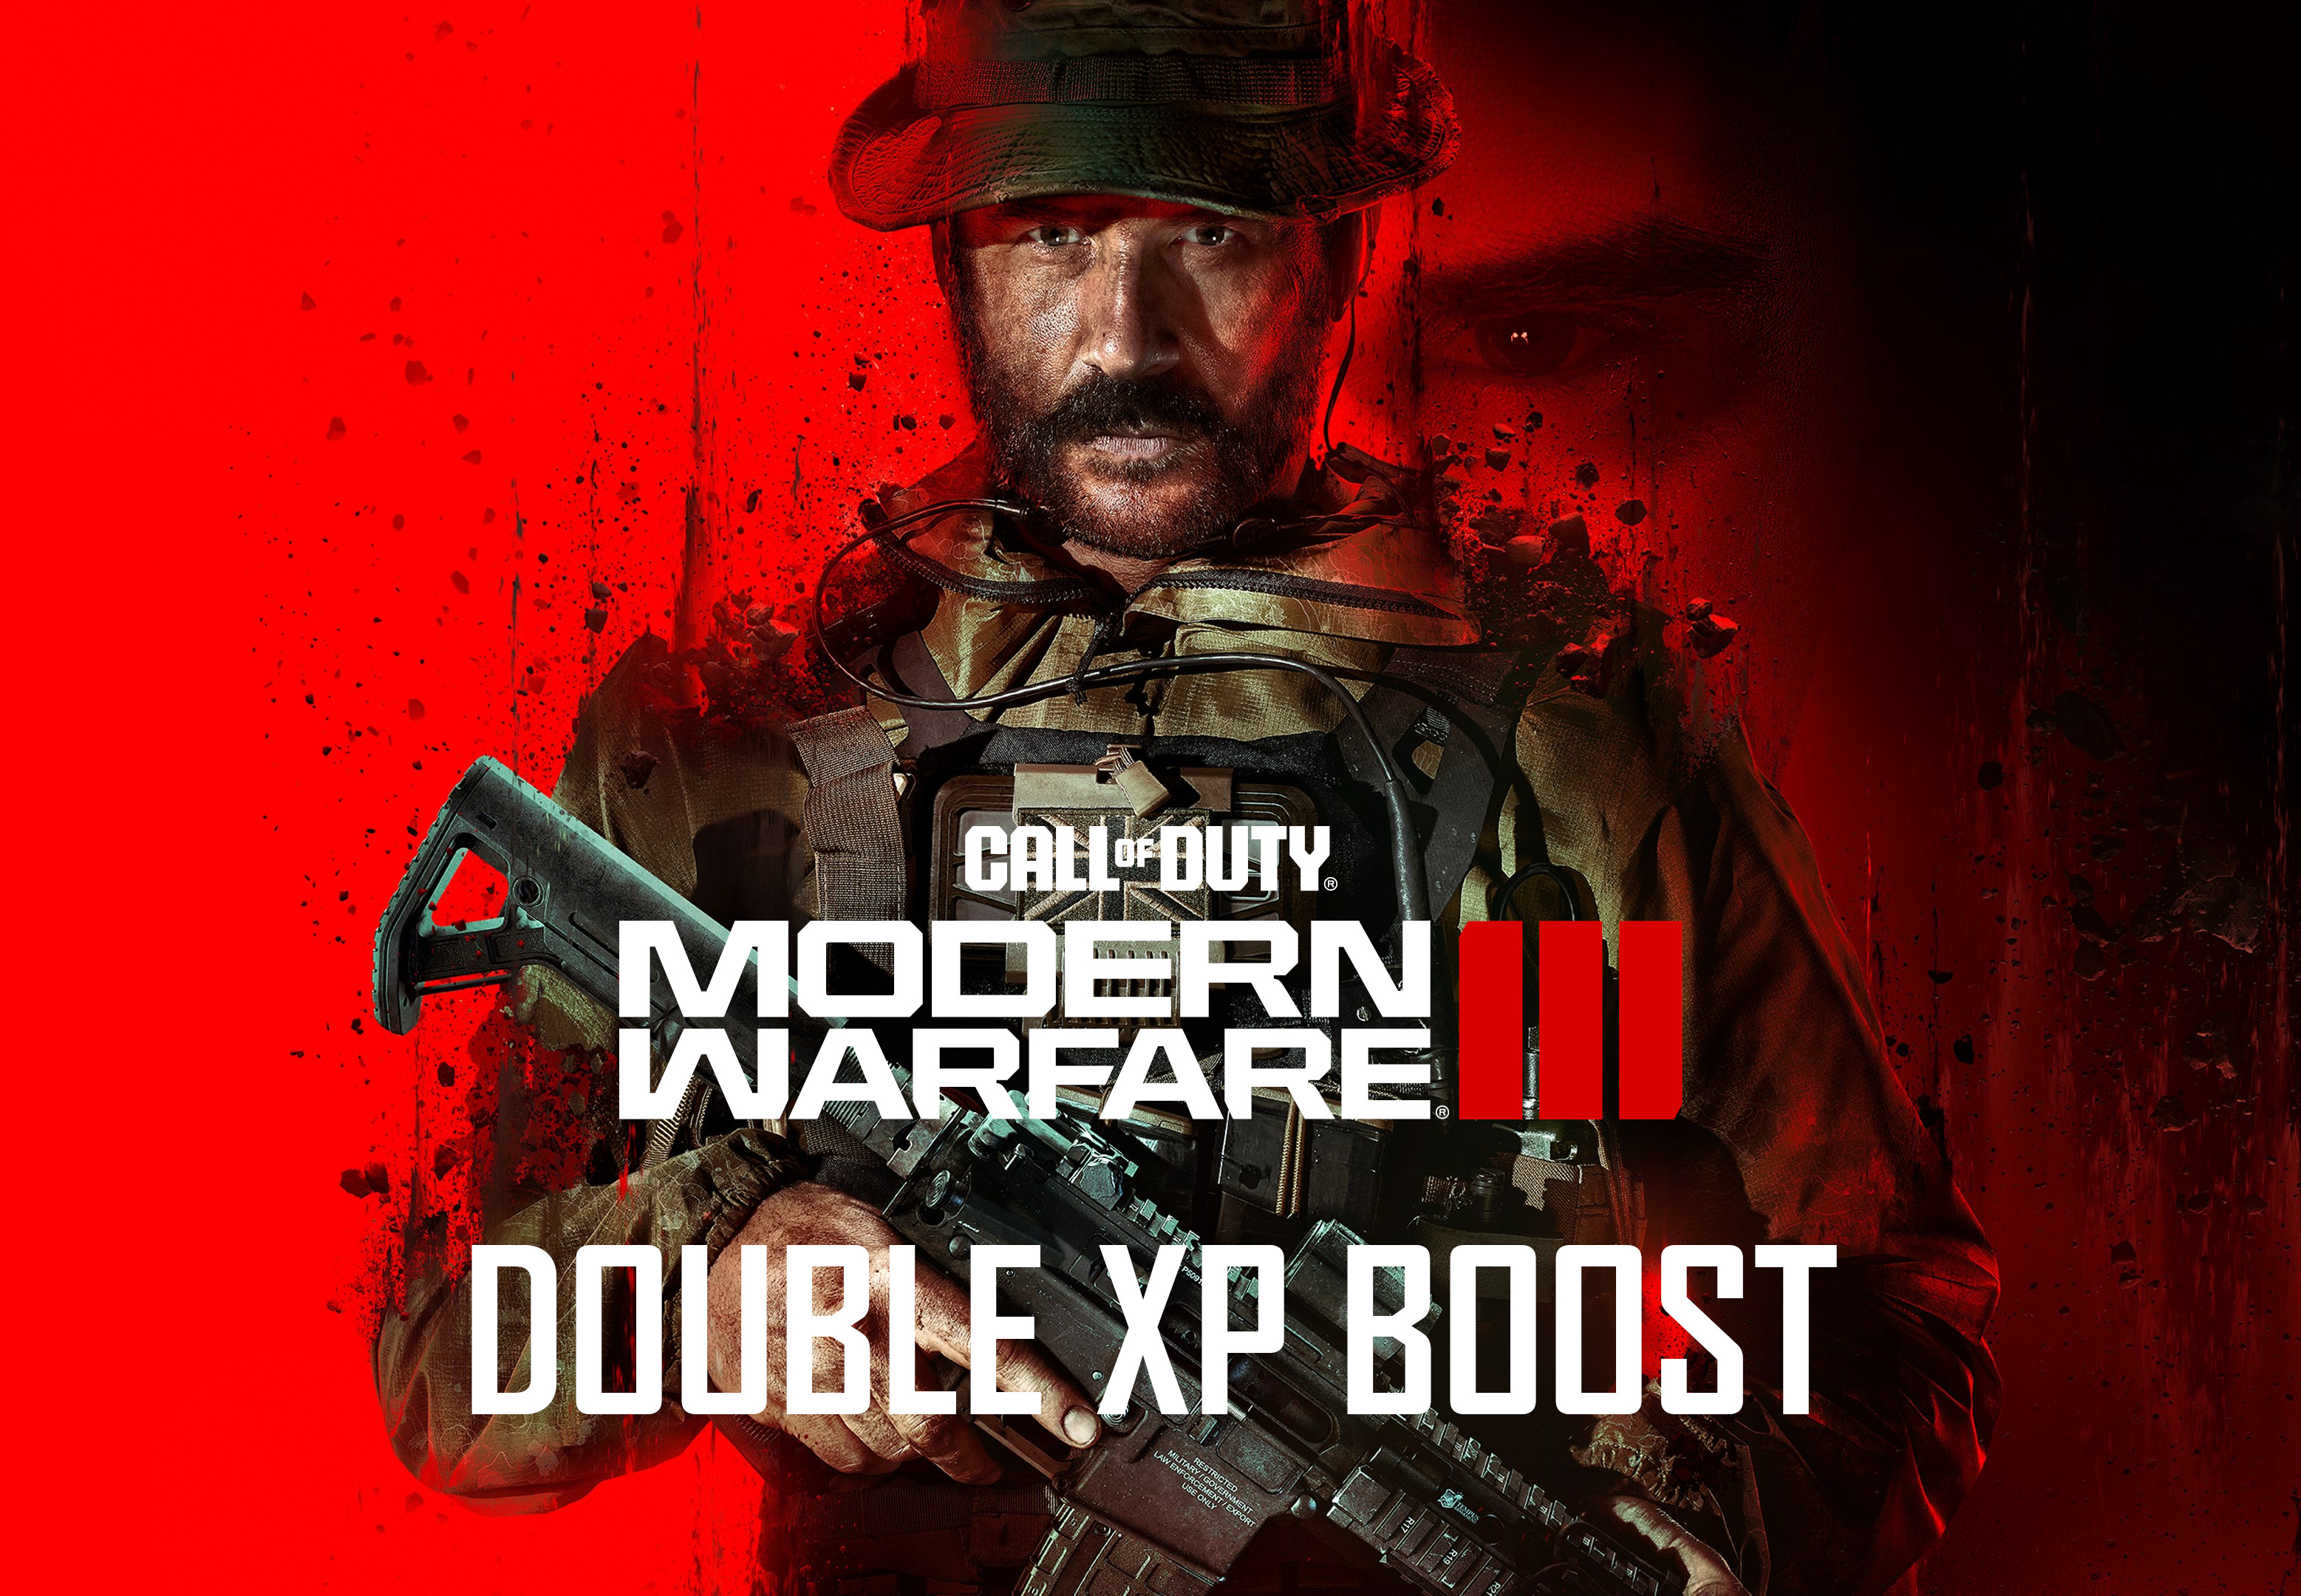 Call Of Duty: Modern Warfare III / Warzone 2 - 4 Hours Double XP Boost PC/PS4/PS5/XBOX One/Series X,S CD Key